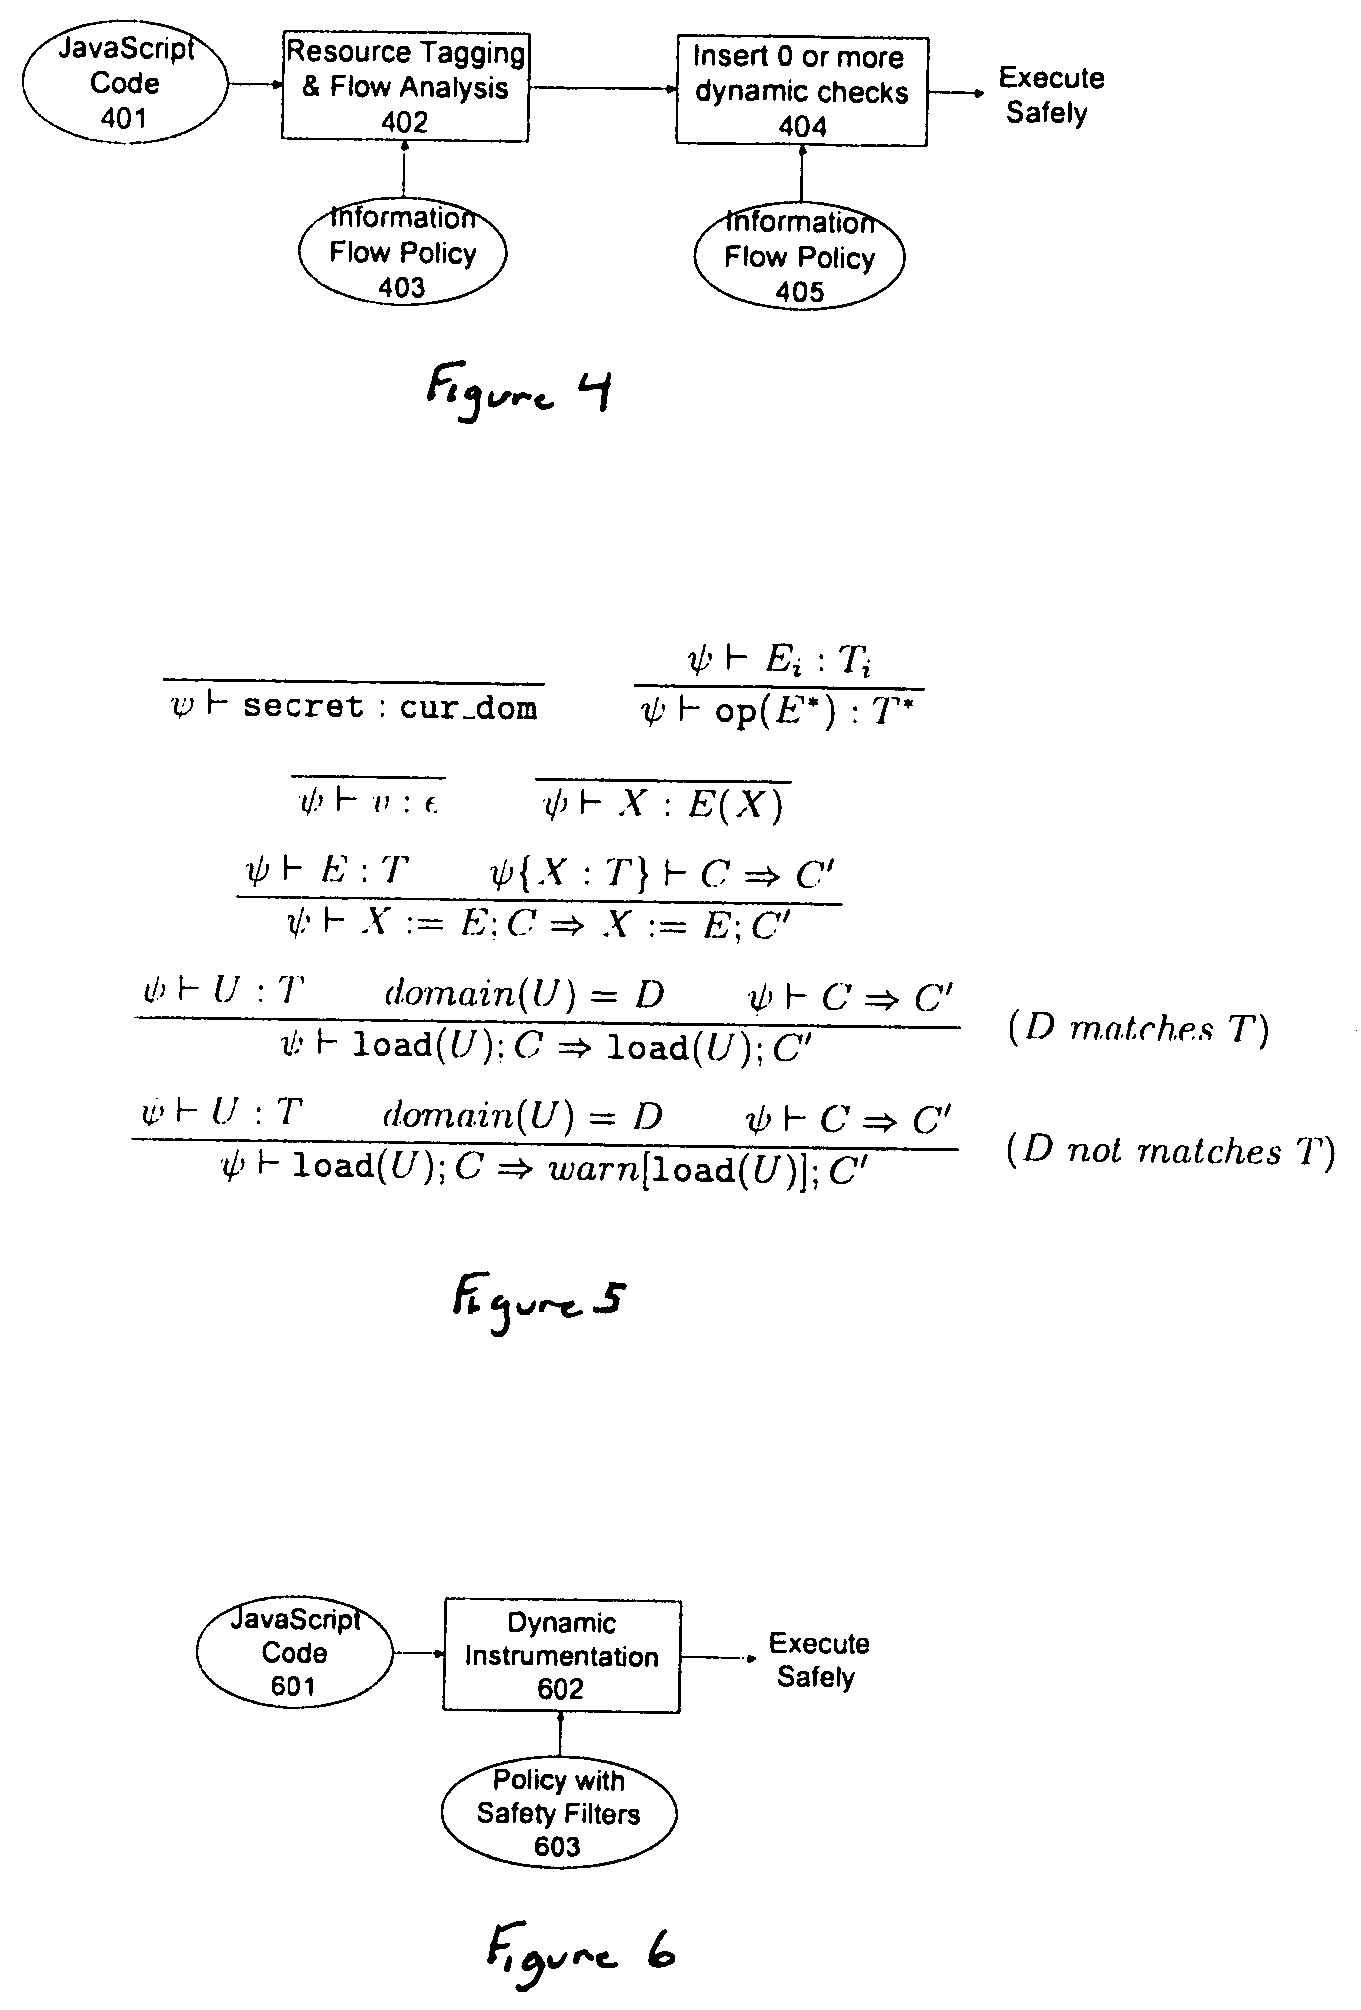 Method and apparatus for detecting and preventing unsafe behavior of javascript programs